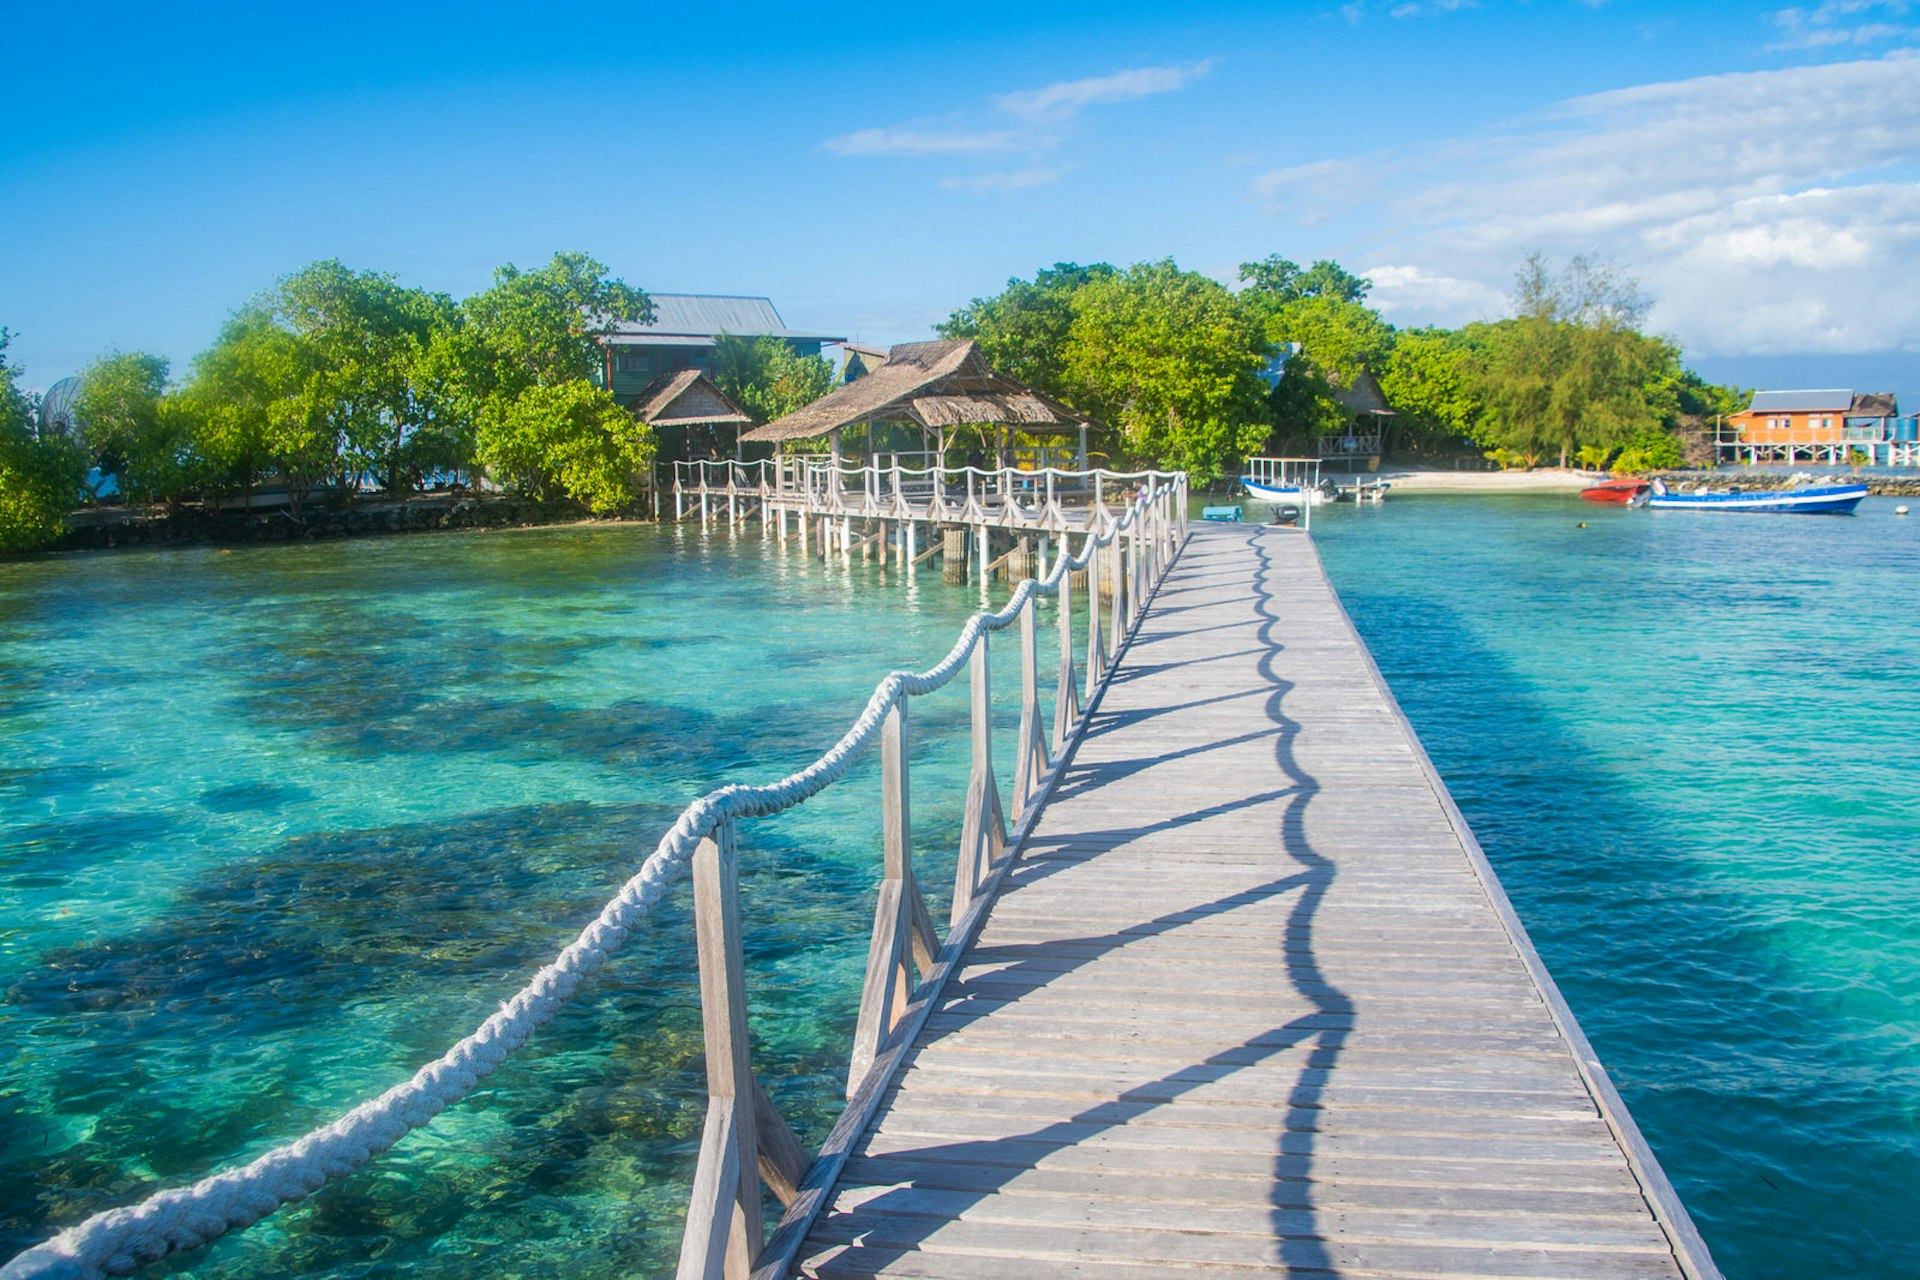 A wooden walkway over crystal-blue waters with a rope railing on one side leads to the Imagination Island resort. The resort is partially obscured by lush greenery, there are a few small boats moored on the shore and an orange building in the far background. 